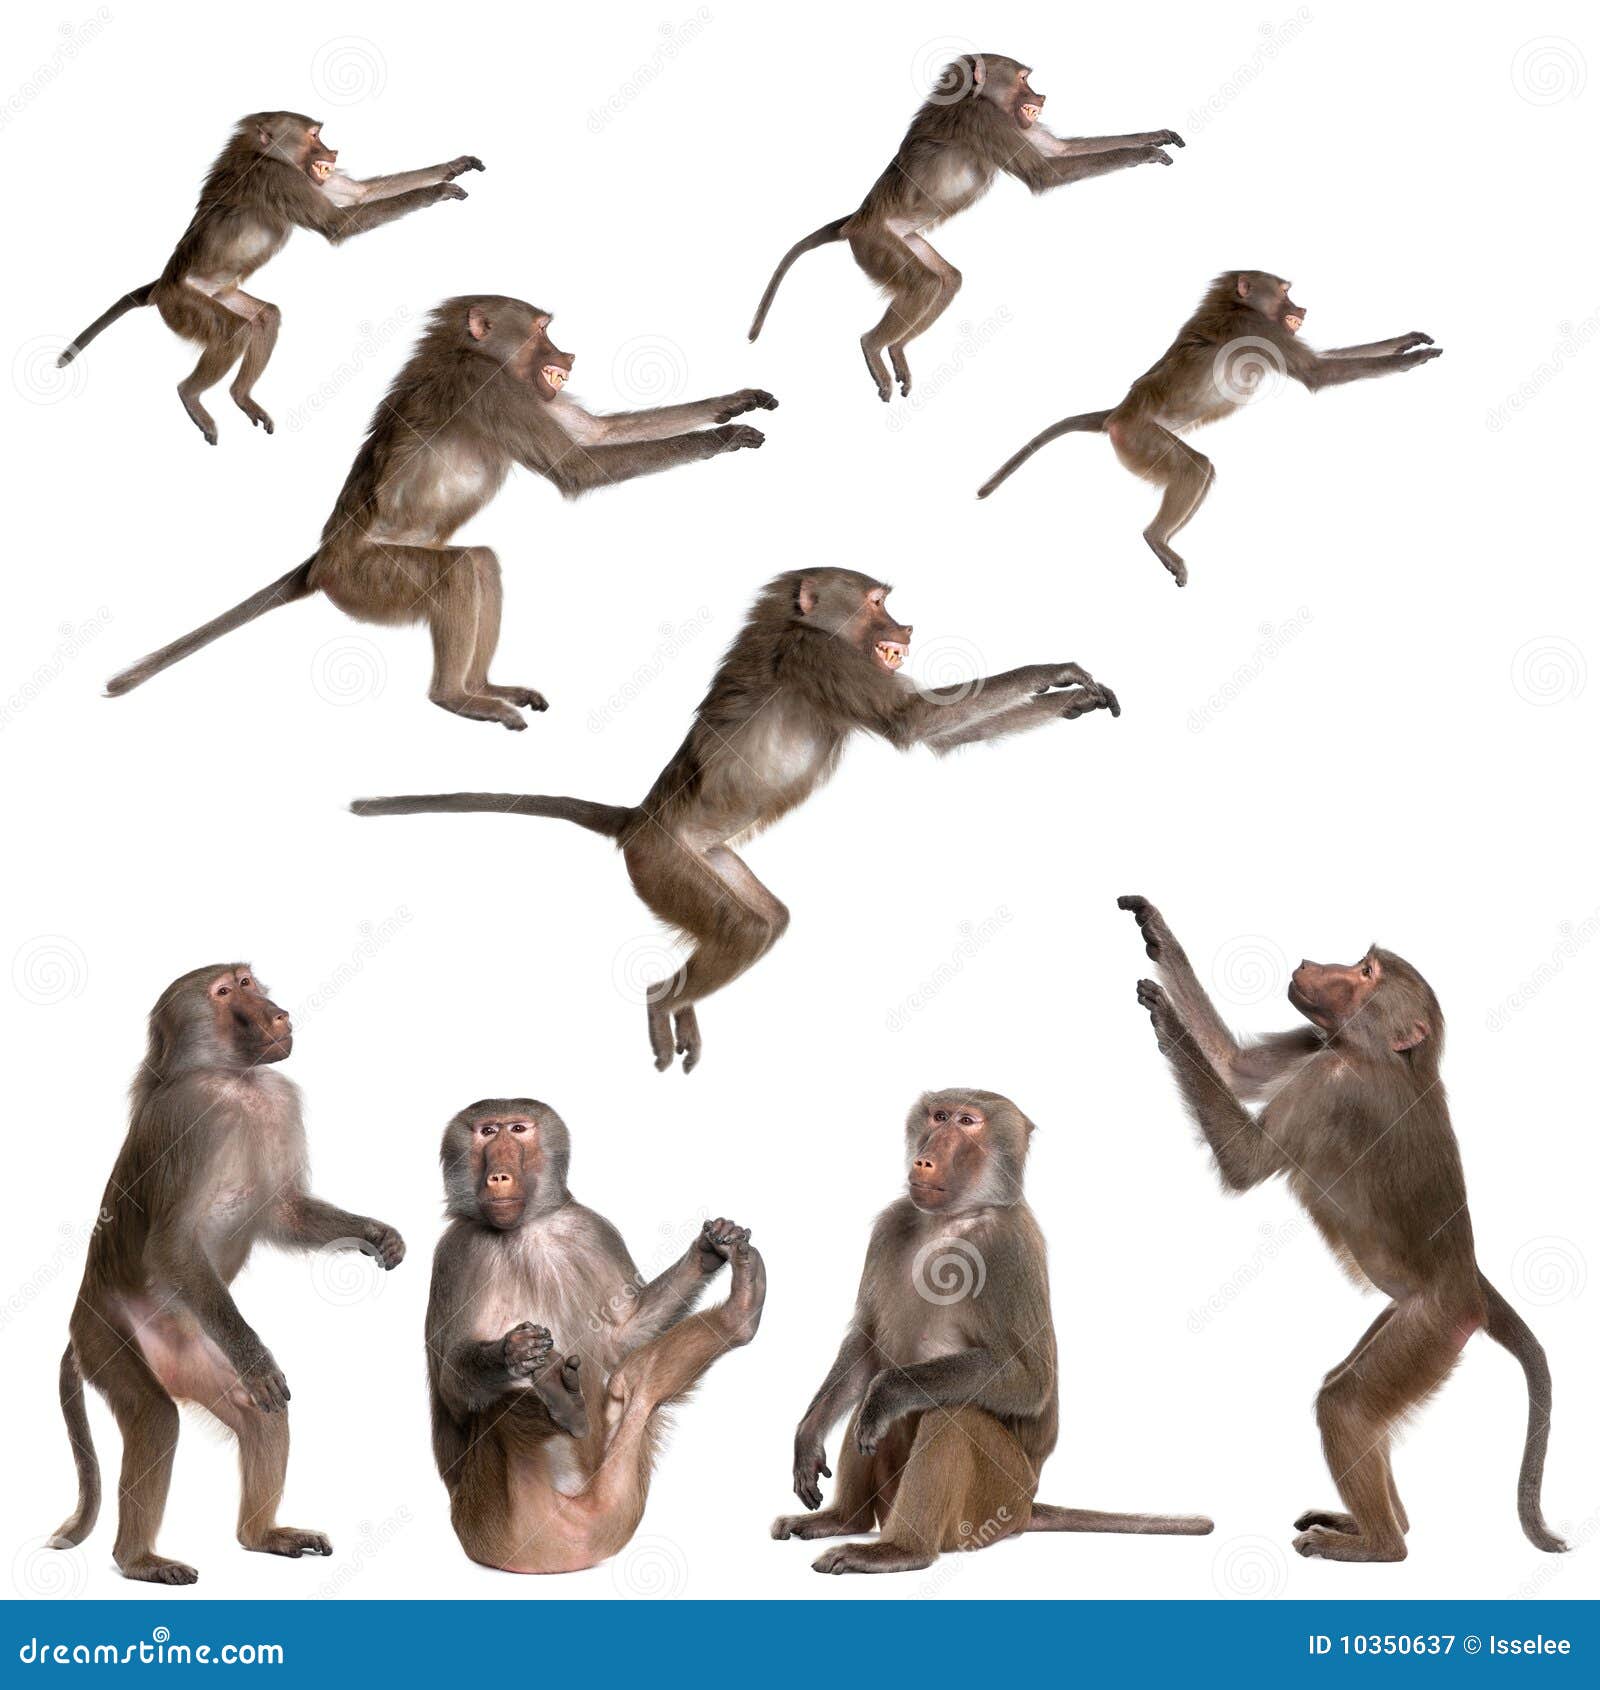 many views of baboon